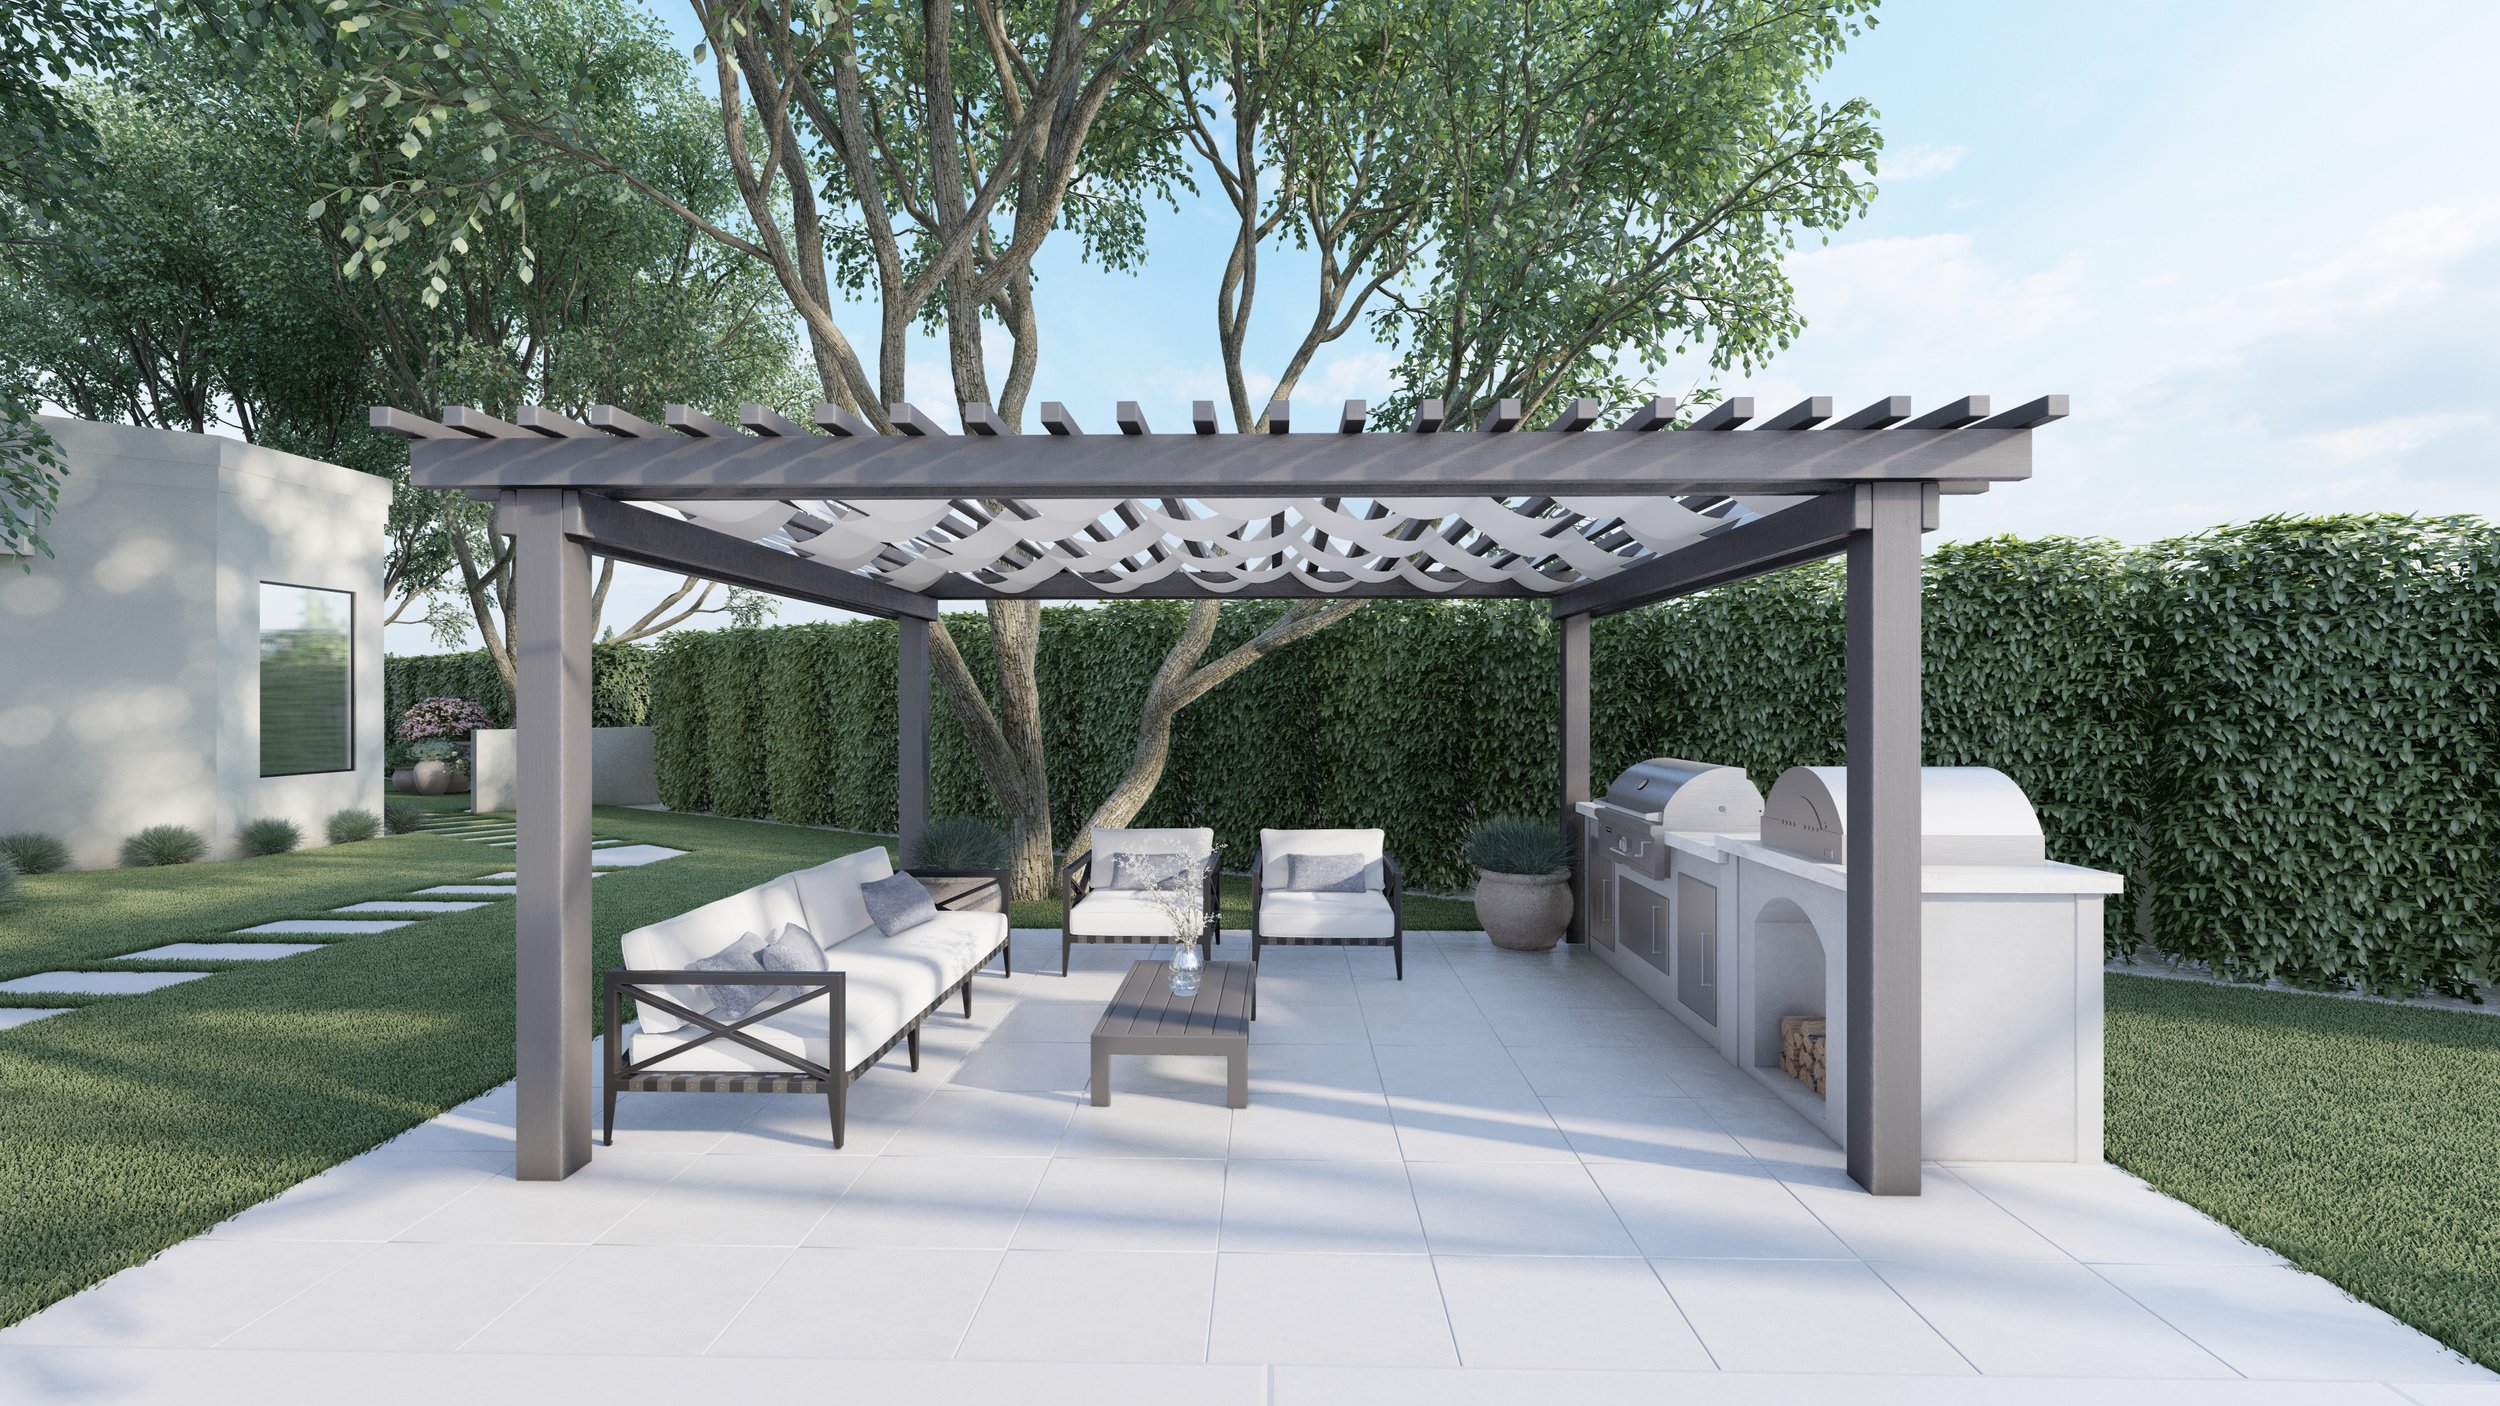 An outdoor kitchen with a pergola over it and greenery all around